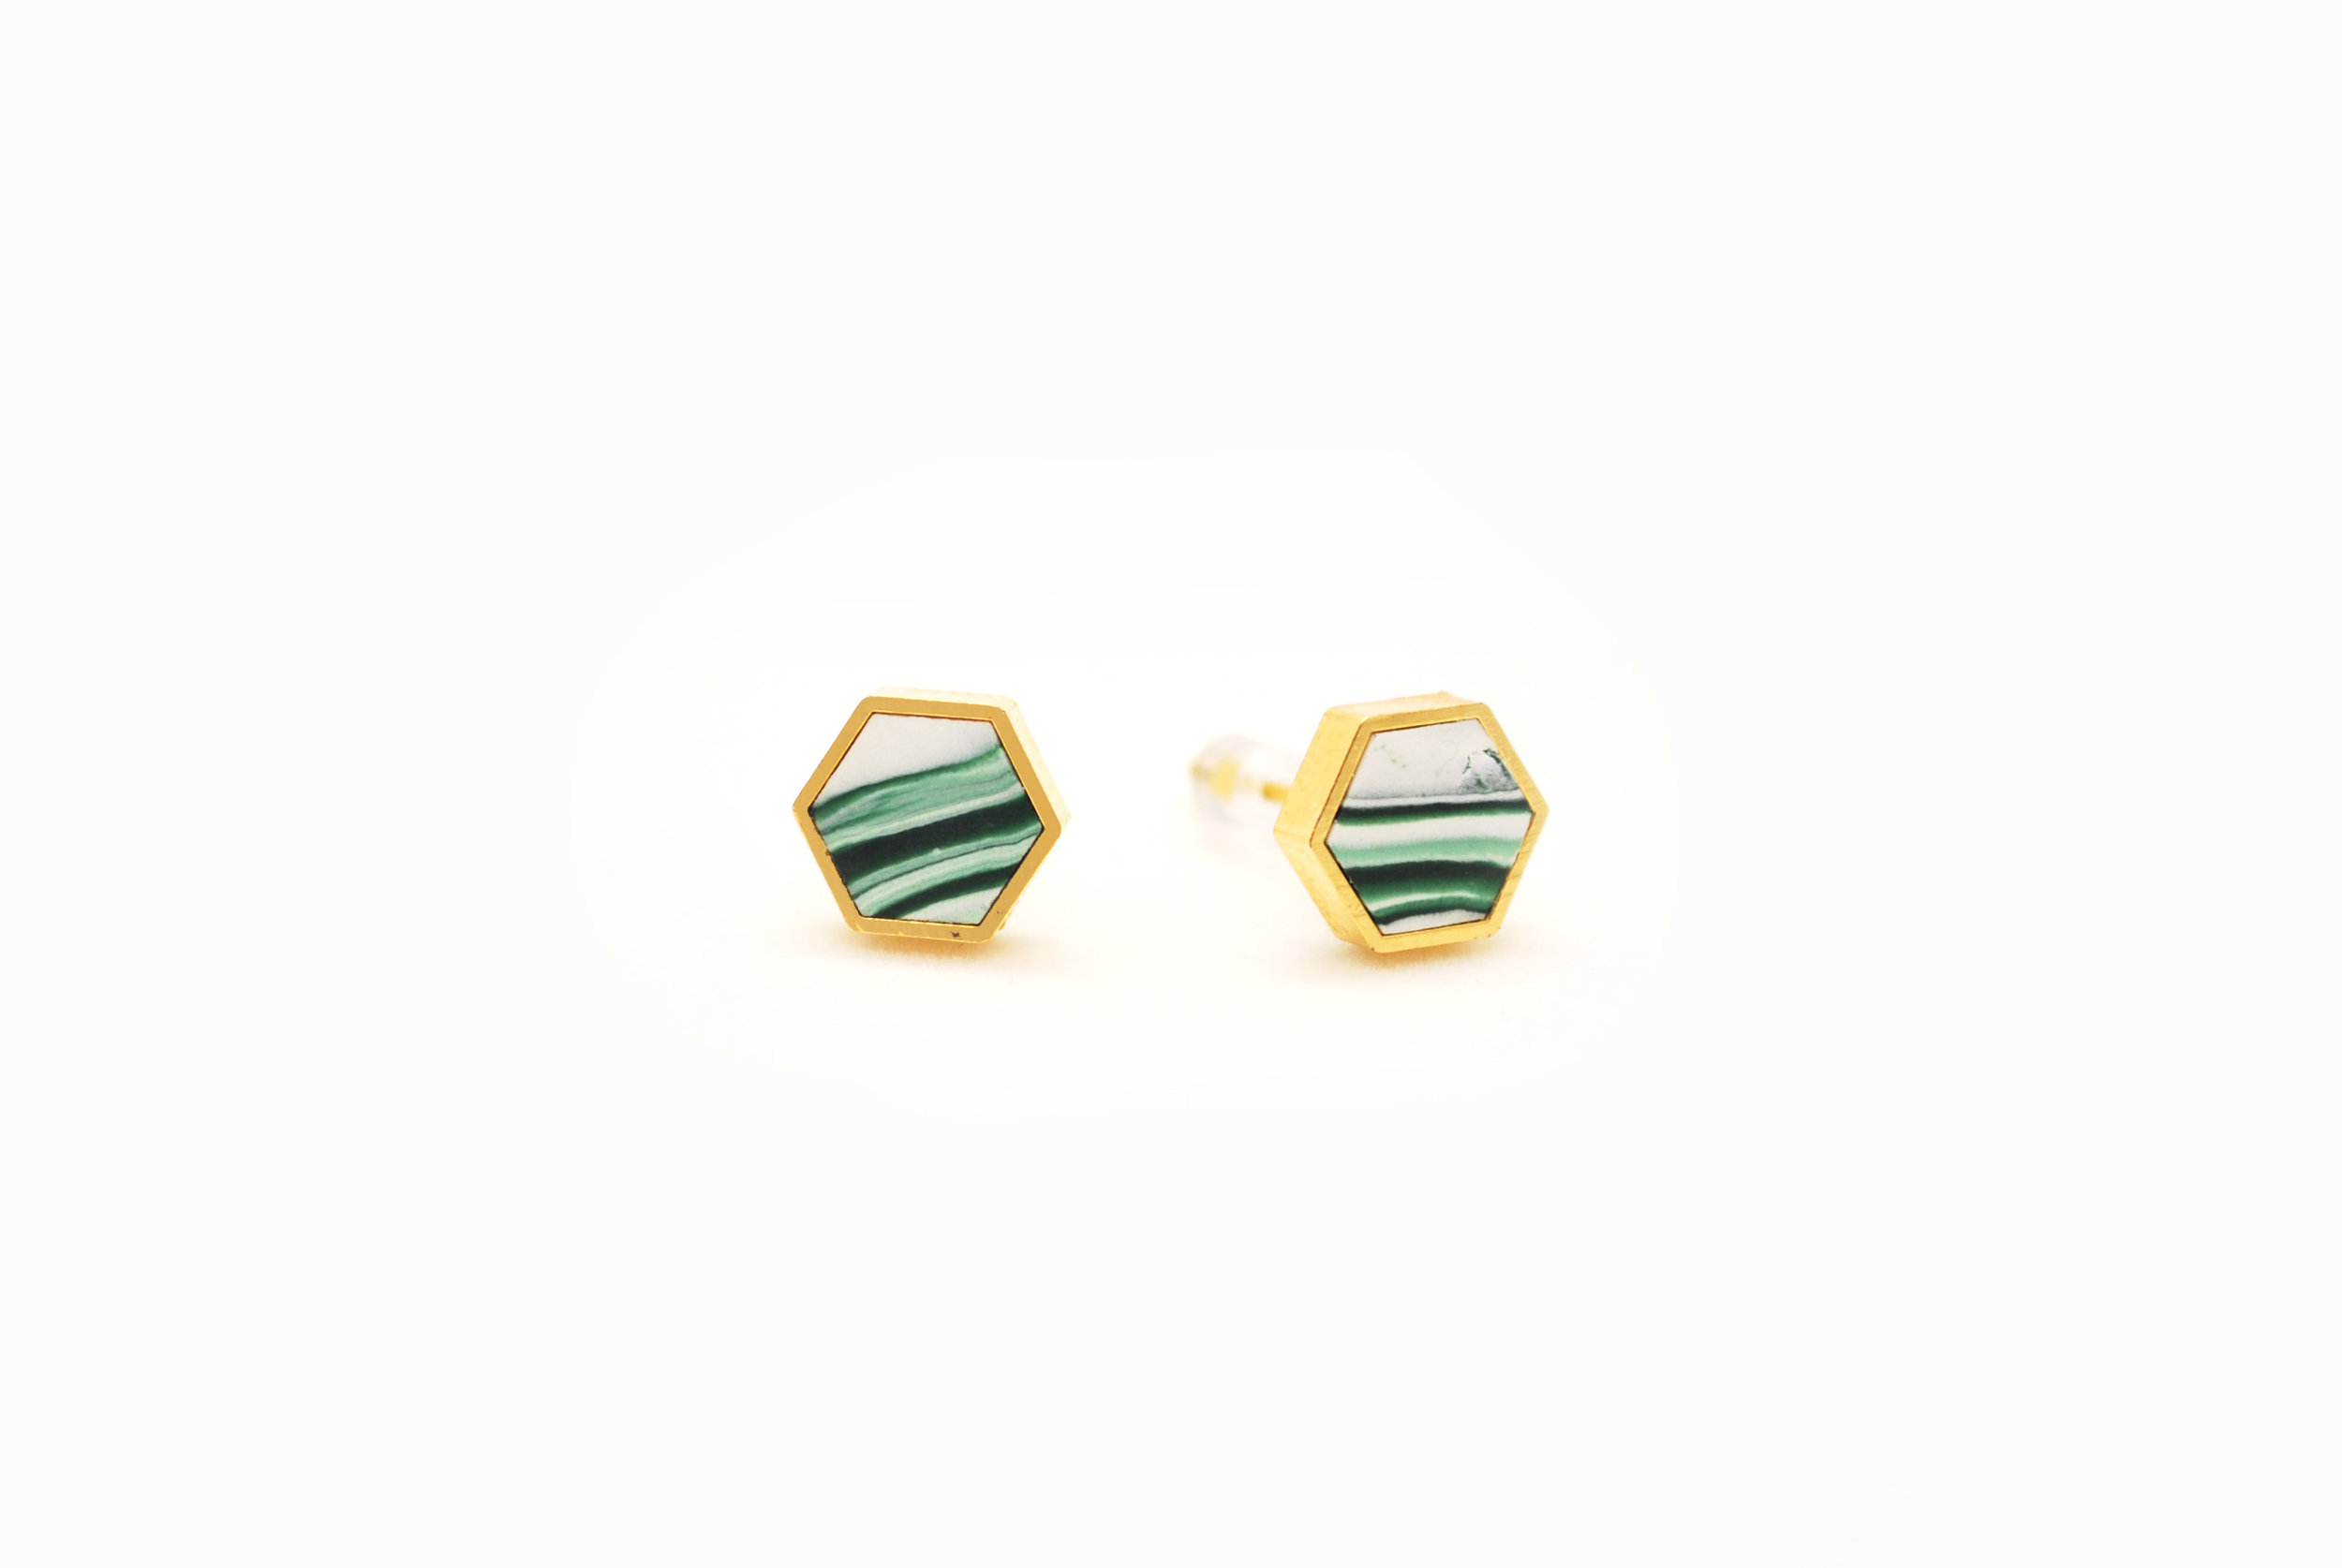 Hexagonal stud earrings in a granite style with gold leaf